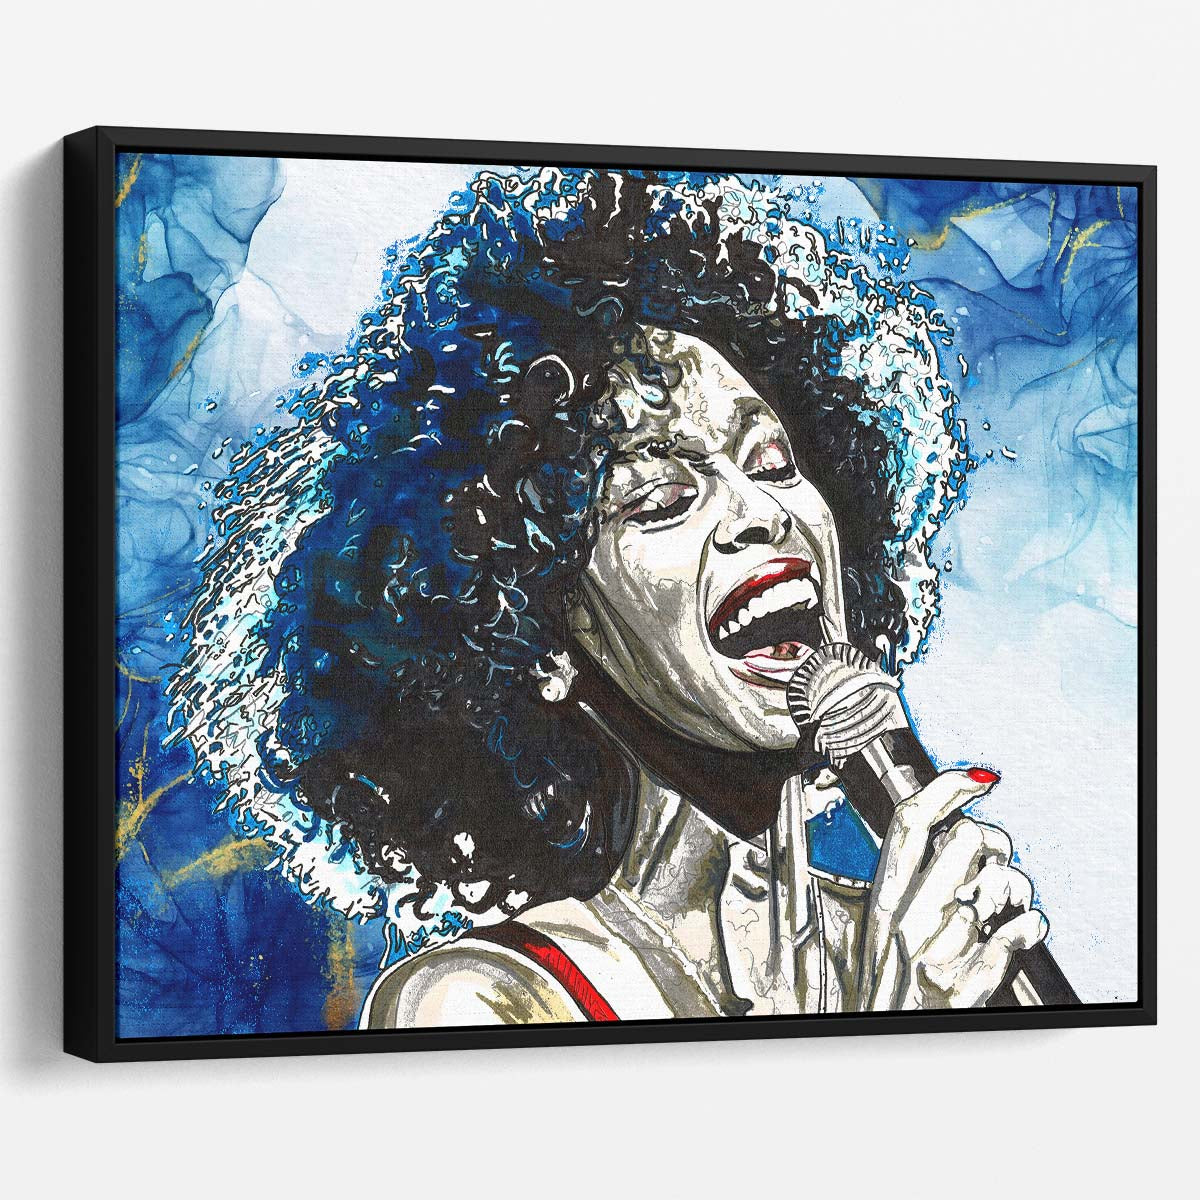 Iconic Whitney Houston Illustration Wall Art by Luxuriance Designs. Made in USA.